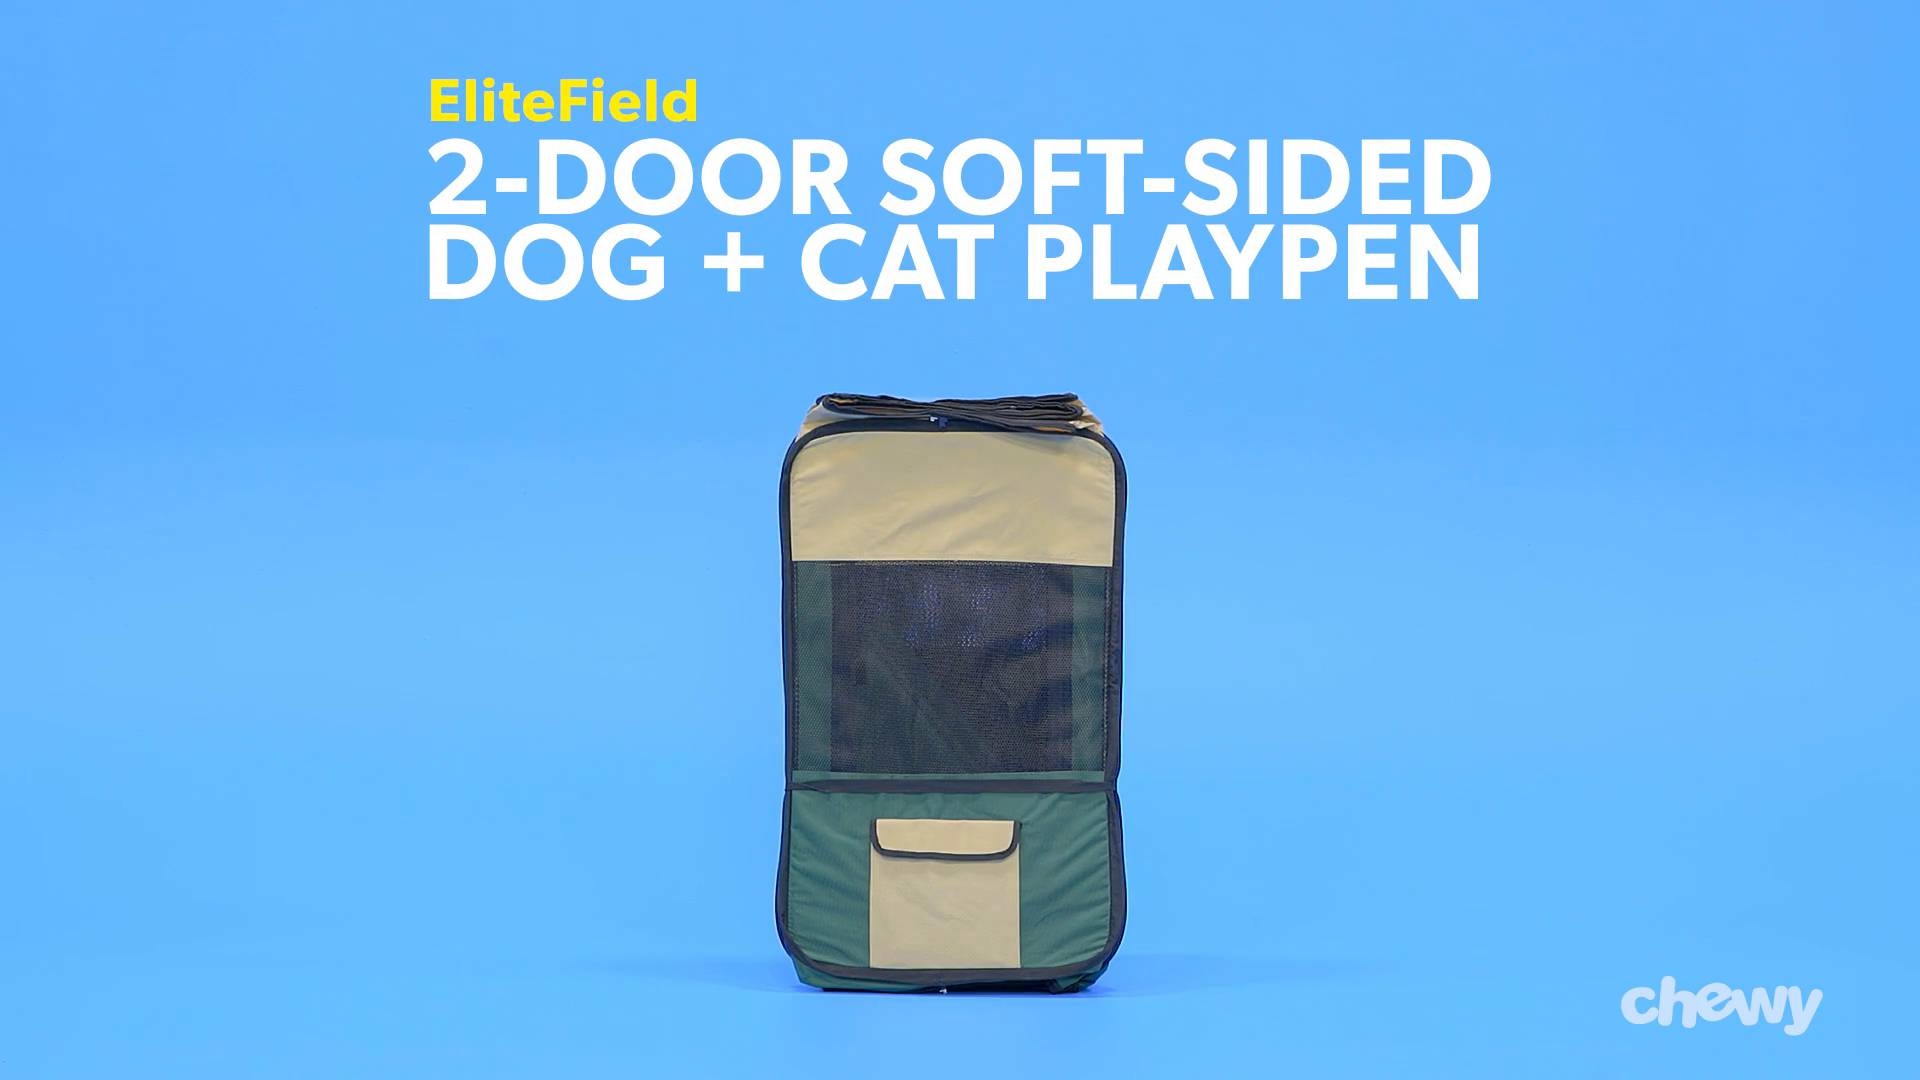 Cats and Other Pets Multiple Sizes and Colors Available for Dogs EliteField 2-Door Soft Pet Playpen Exercise Pen 